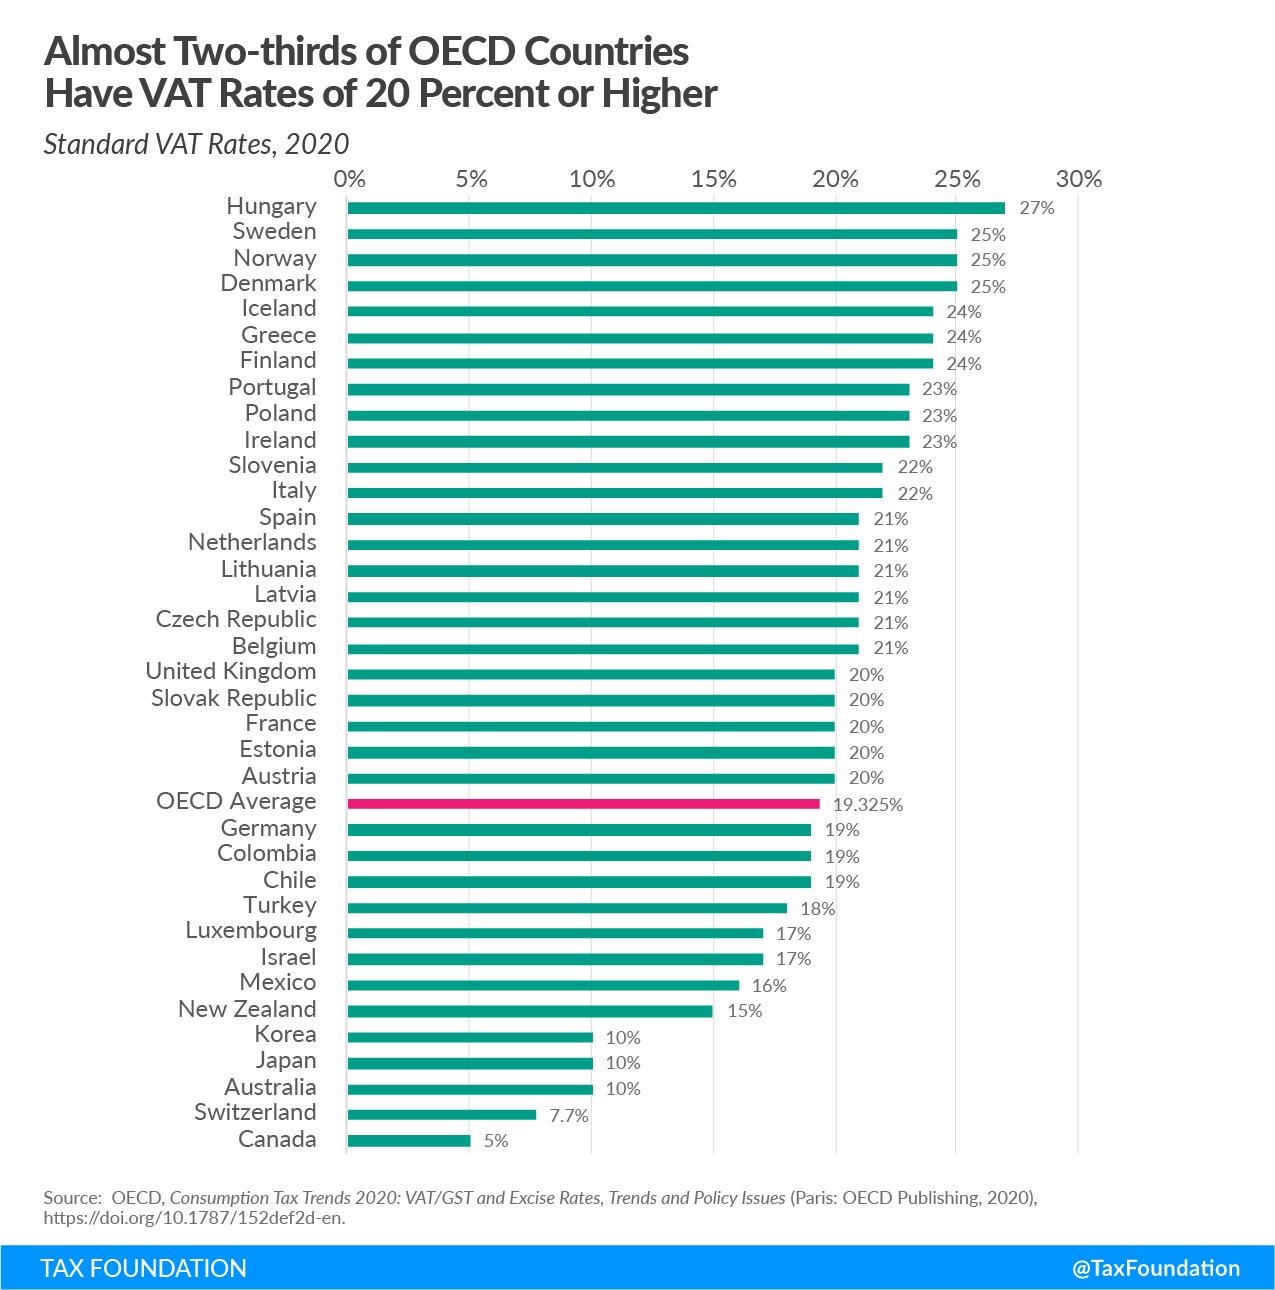 Almost Two-thirds of OECD Countries Have VAT Rates of 20 Percent or Higher Consumption taxes in the OECD consumption tax trends, Sales tax vs. VAT. Excise tax trends